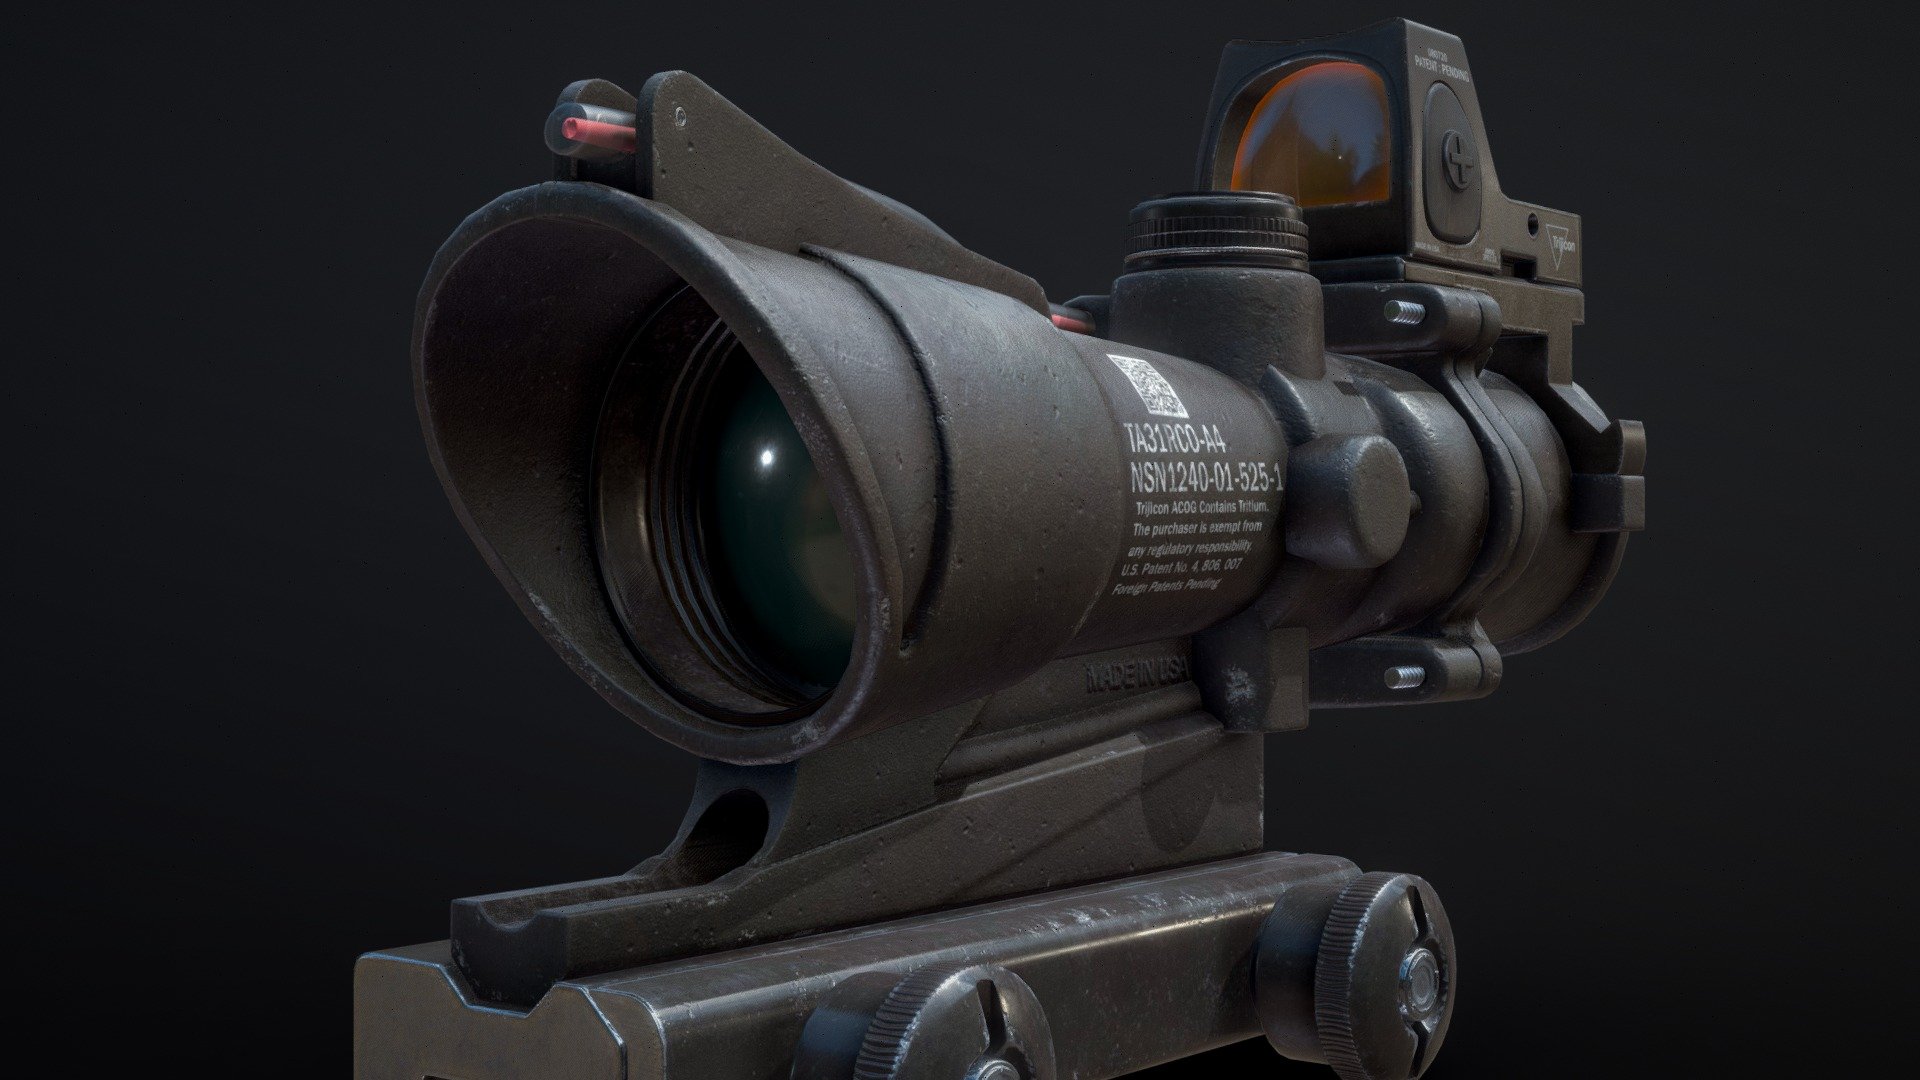 A classic ACOG scope from the Trijicon Brand + a Red dot.

Quite happy with how it turned out. Next project might be a gun that I can attach it too. 
Let me know cool guns to model! At the moment I'm thinking about either a m27 IAR or a SIG MCX.

Artstation post soon :) - (Advanced Combat Optical Gunsight) TRIJICON - 3D model by AntijnvanderGun 3d model